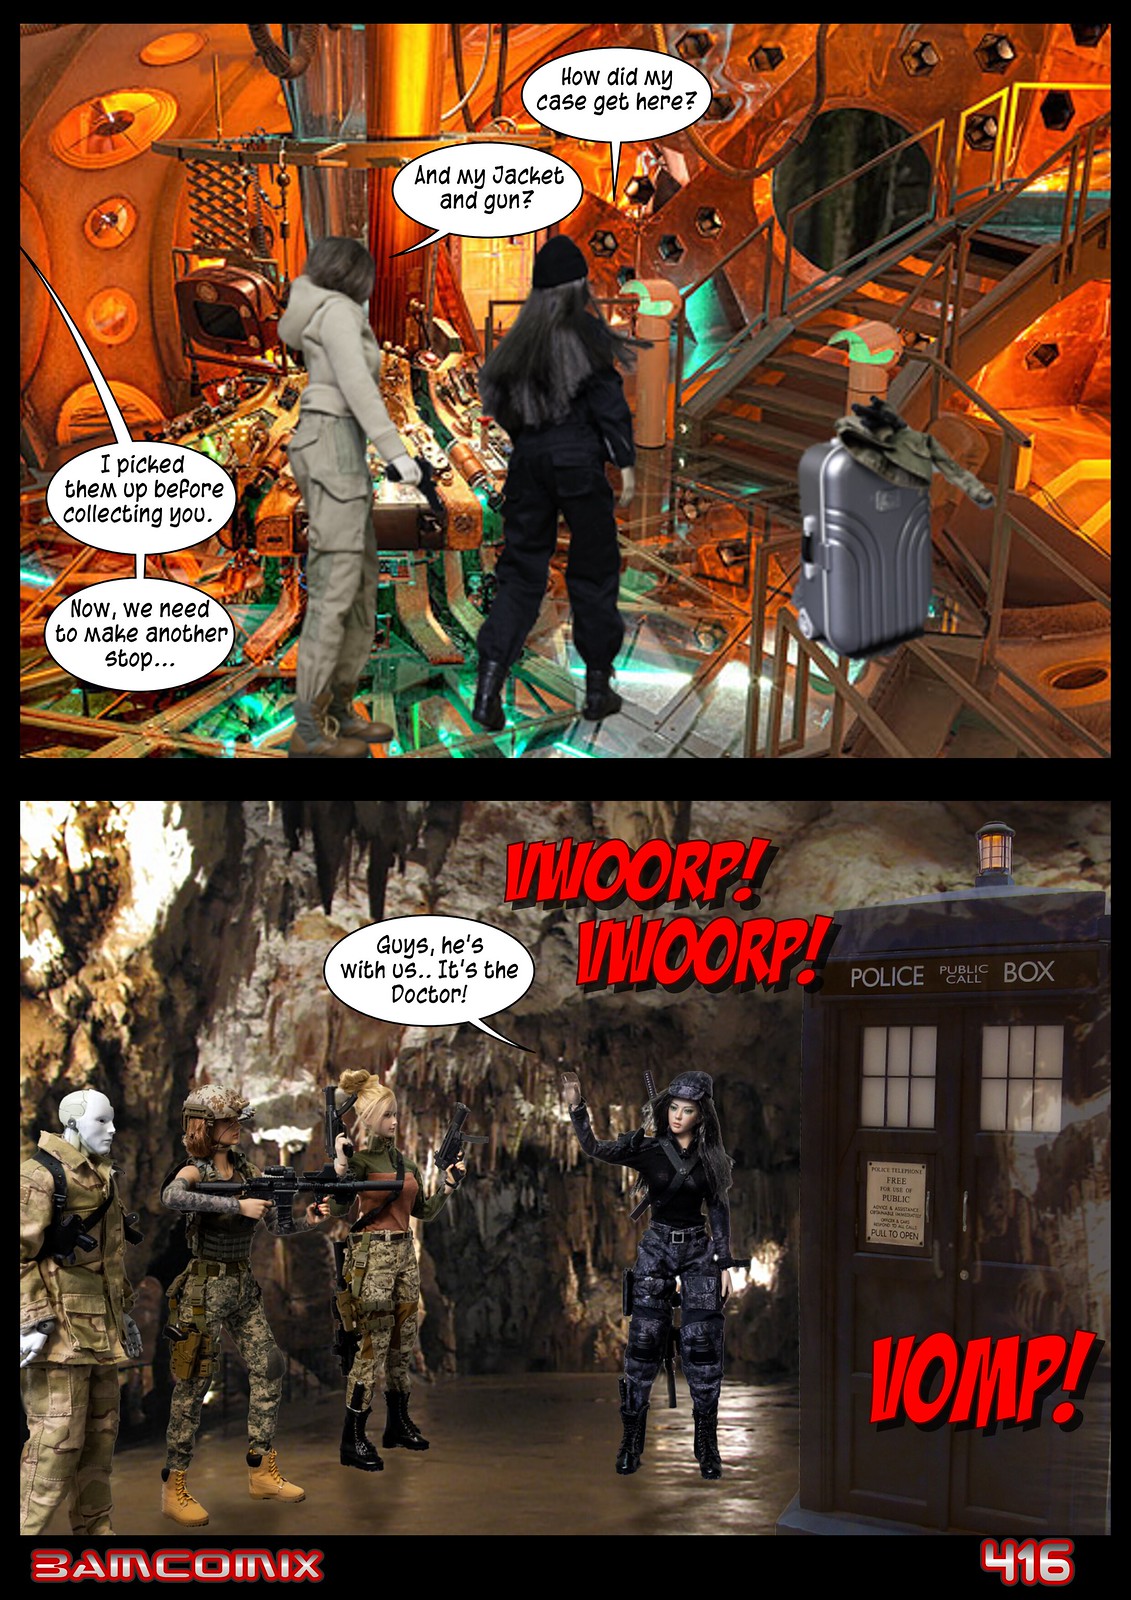 BAMCOMIX Presents - Hidden In The Shadows - Chapter Twenty - Spy Camp Mission Over? 51012159337_e30512f32d_h